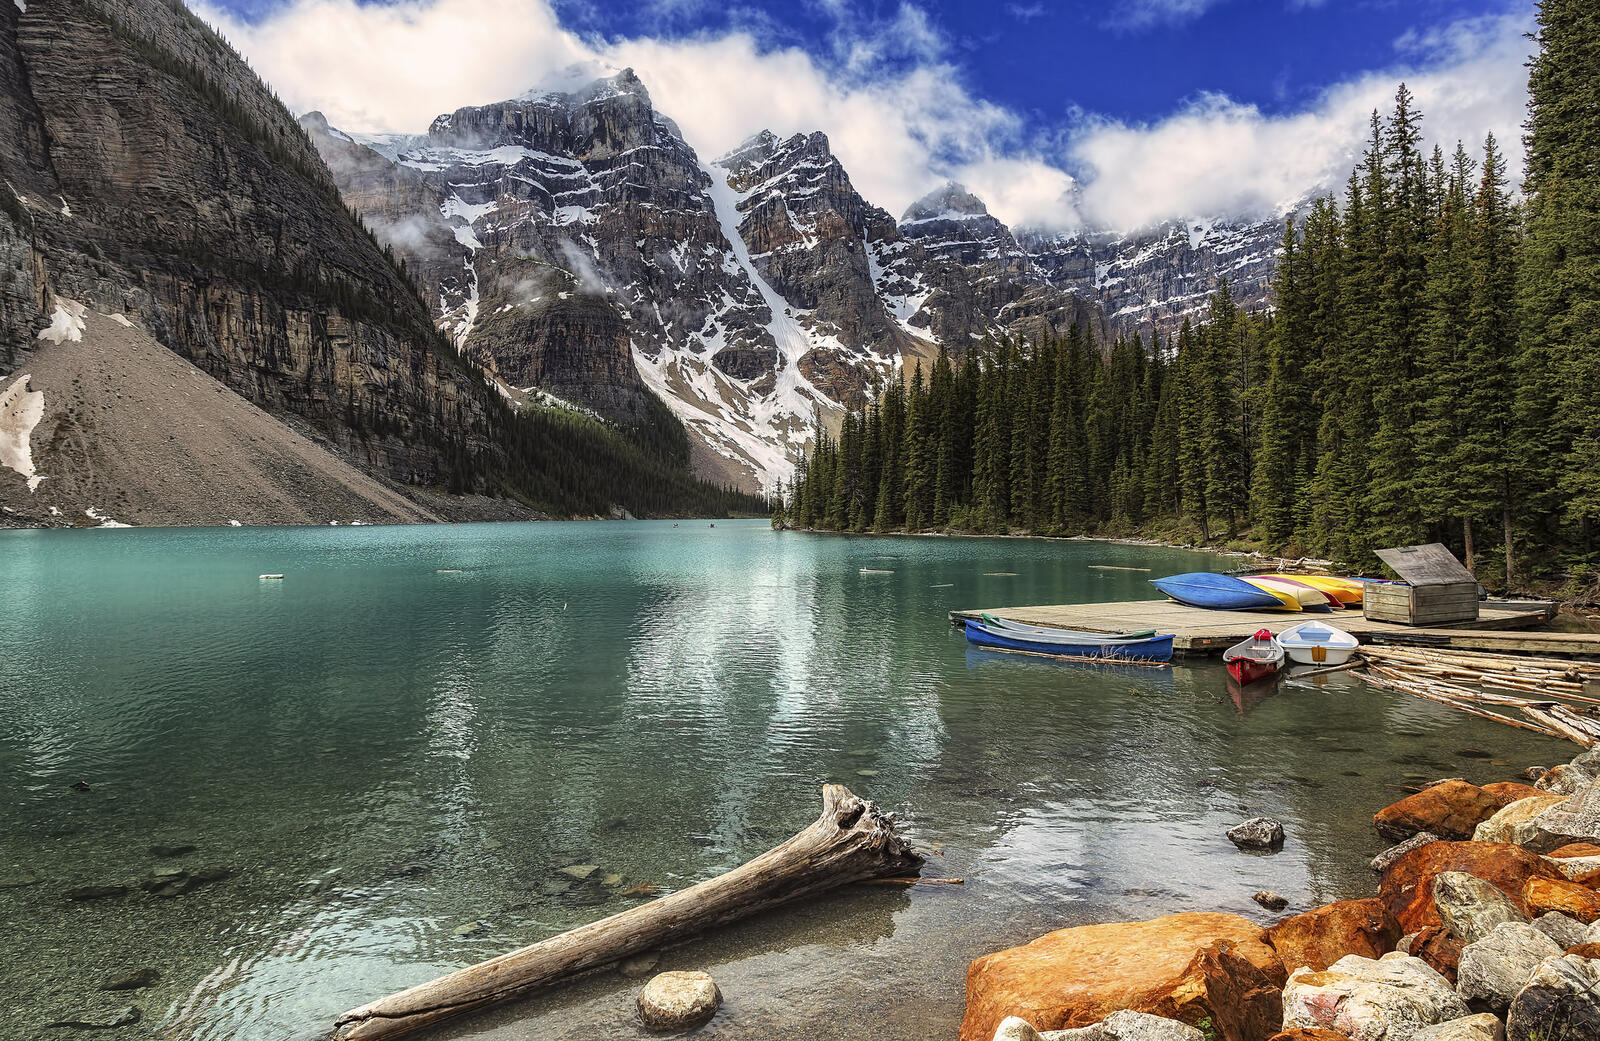 Wallpapers moraine lake clear water banff national park on the desktop